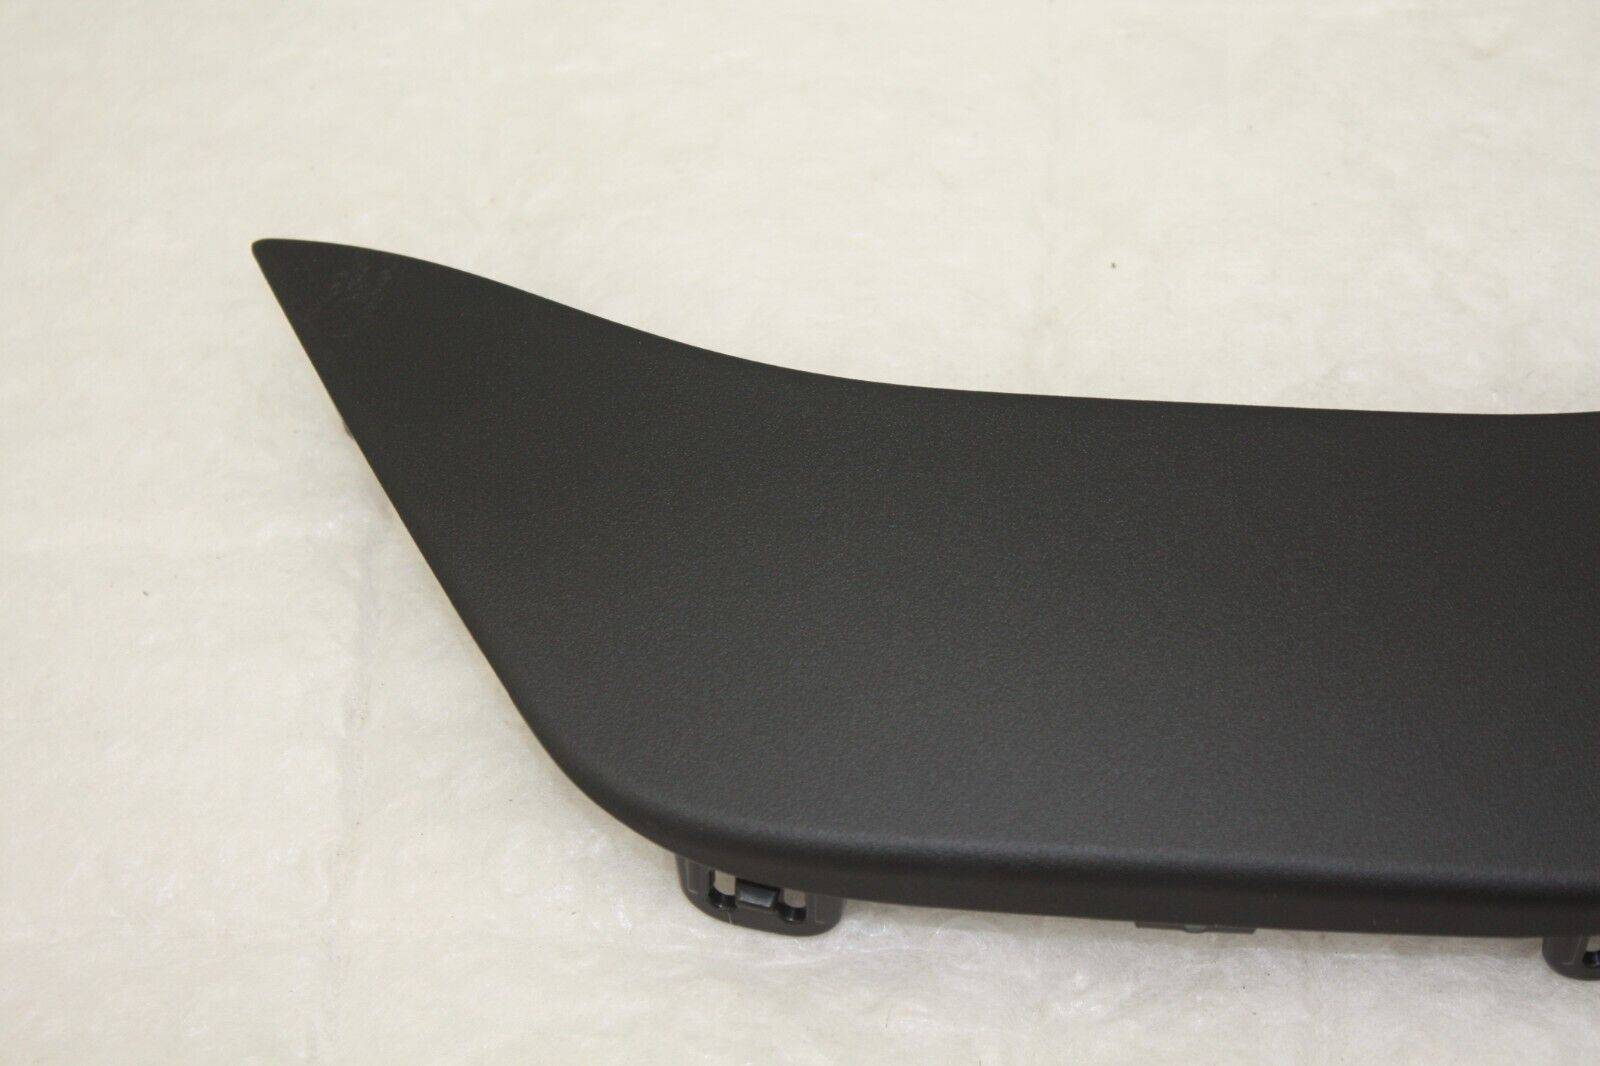 Toyota-Yaris-Front-Bumper-Grill-Cover-2020-ON-53155-K0031-Genuine-176345660711-3